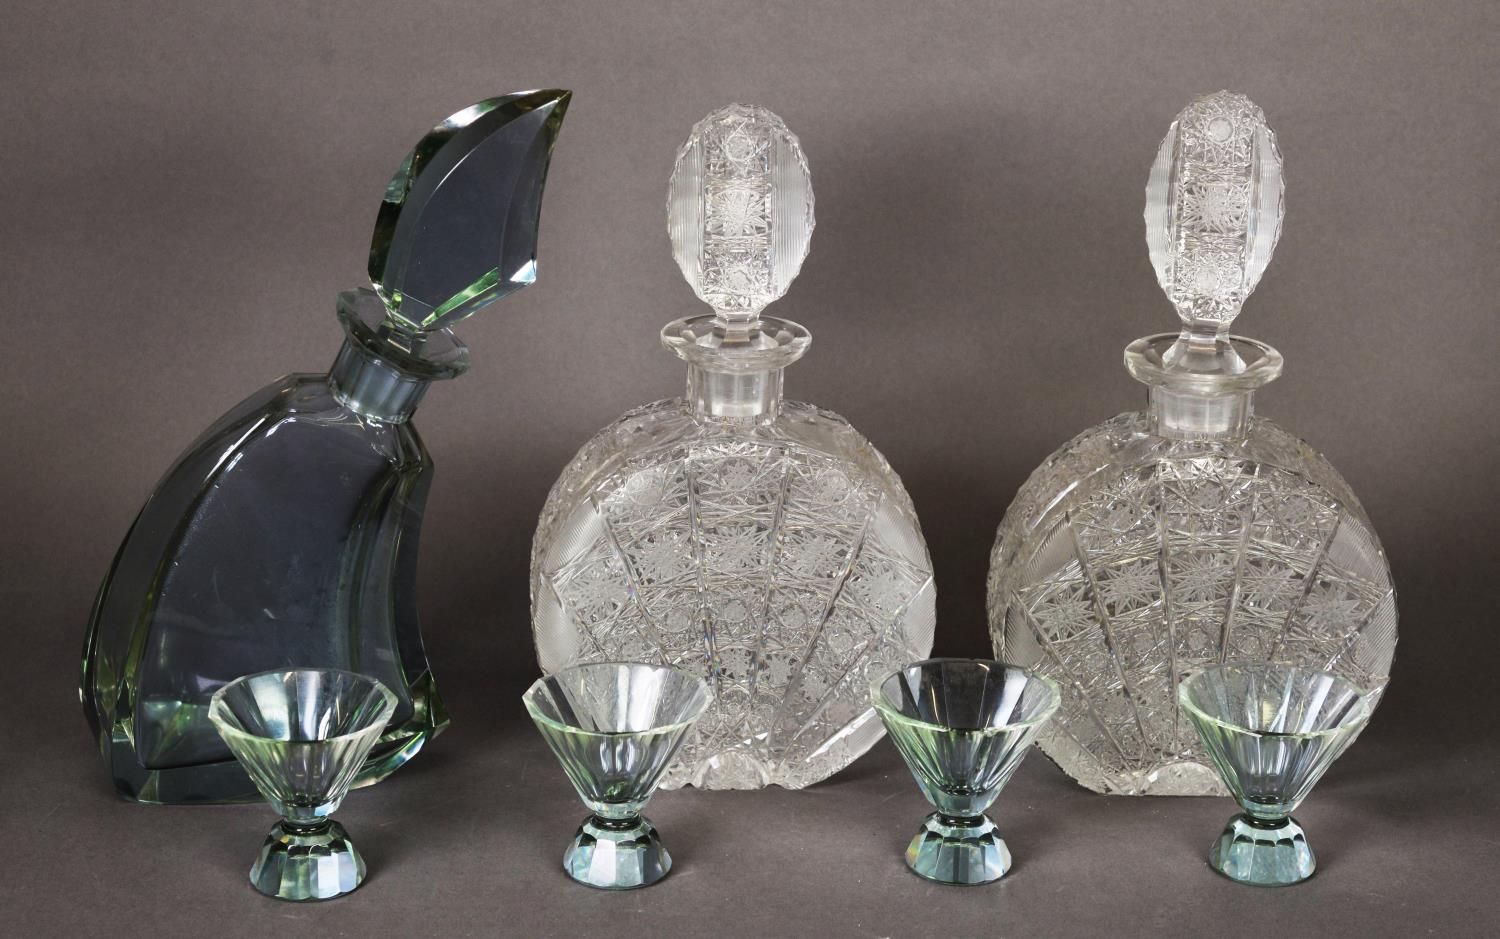 NEAR PAIR OF HAND-BLOWN MOON FLASK DECANTERS, slight variation in the stoppers, plus a 1950s vodka